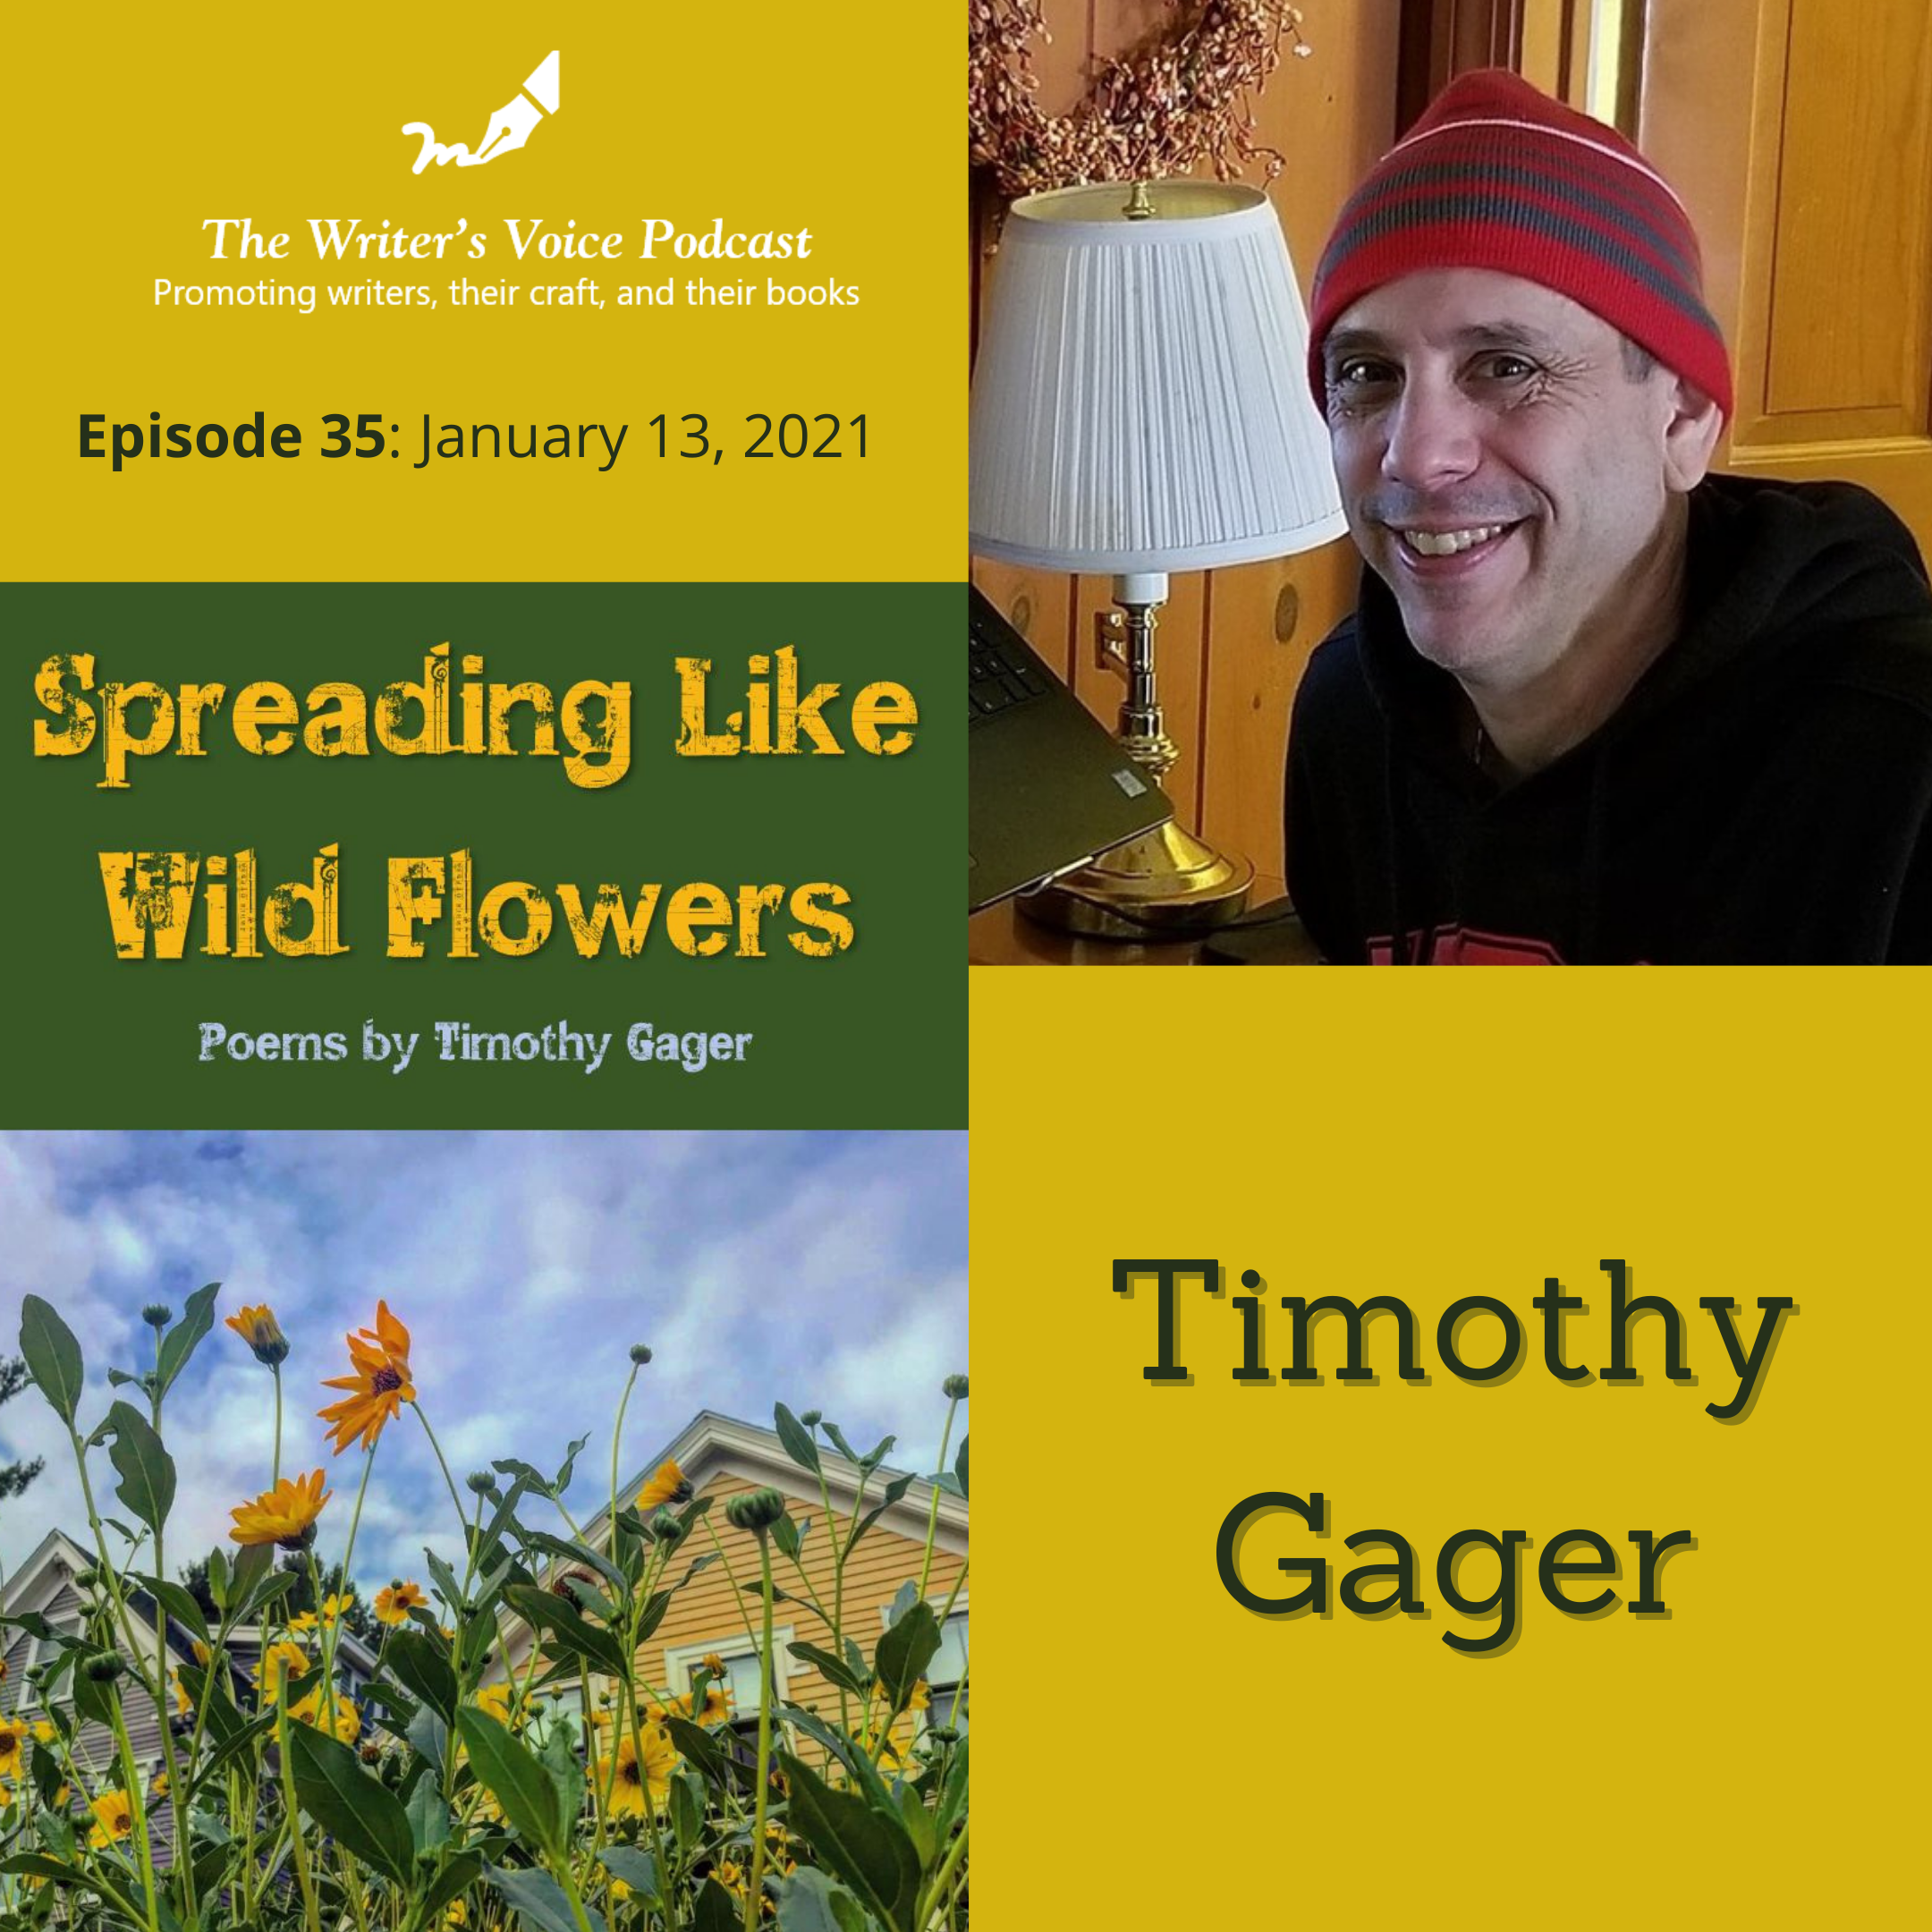 Episode 35: Timothy Gager